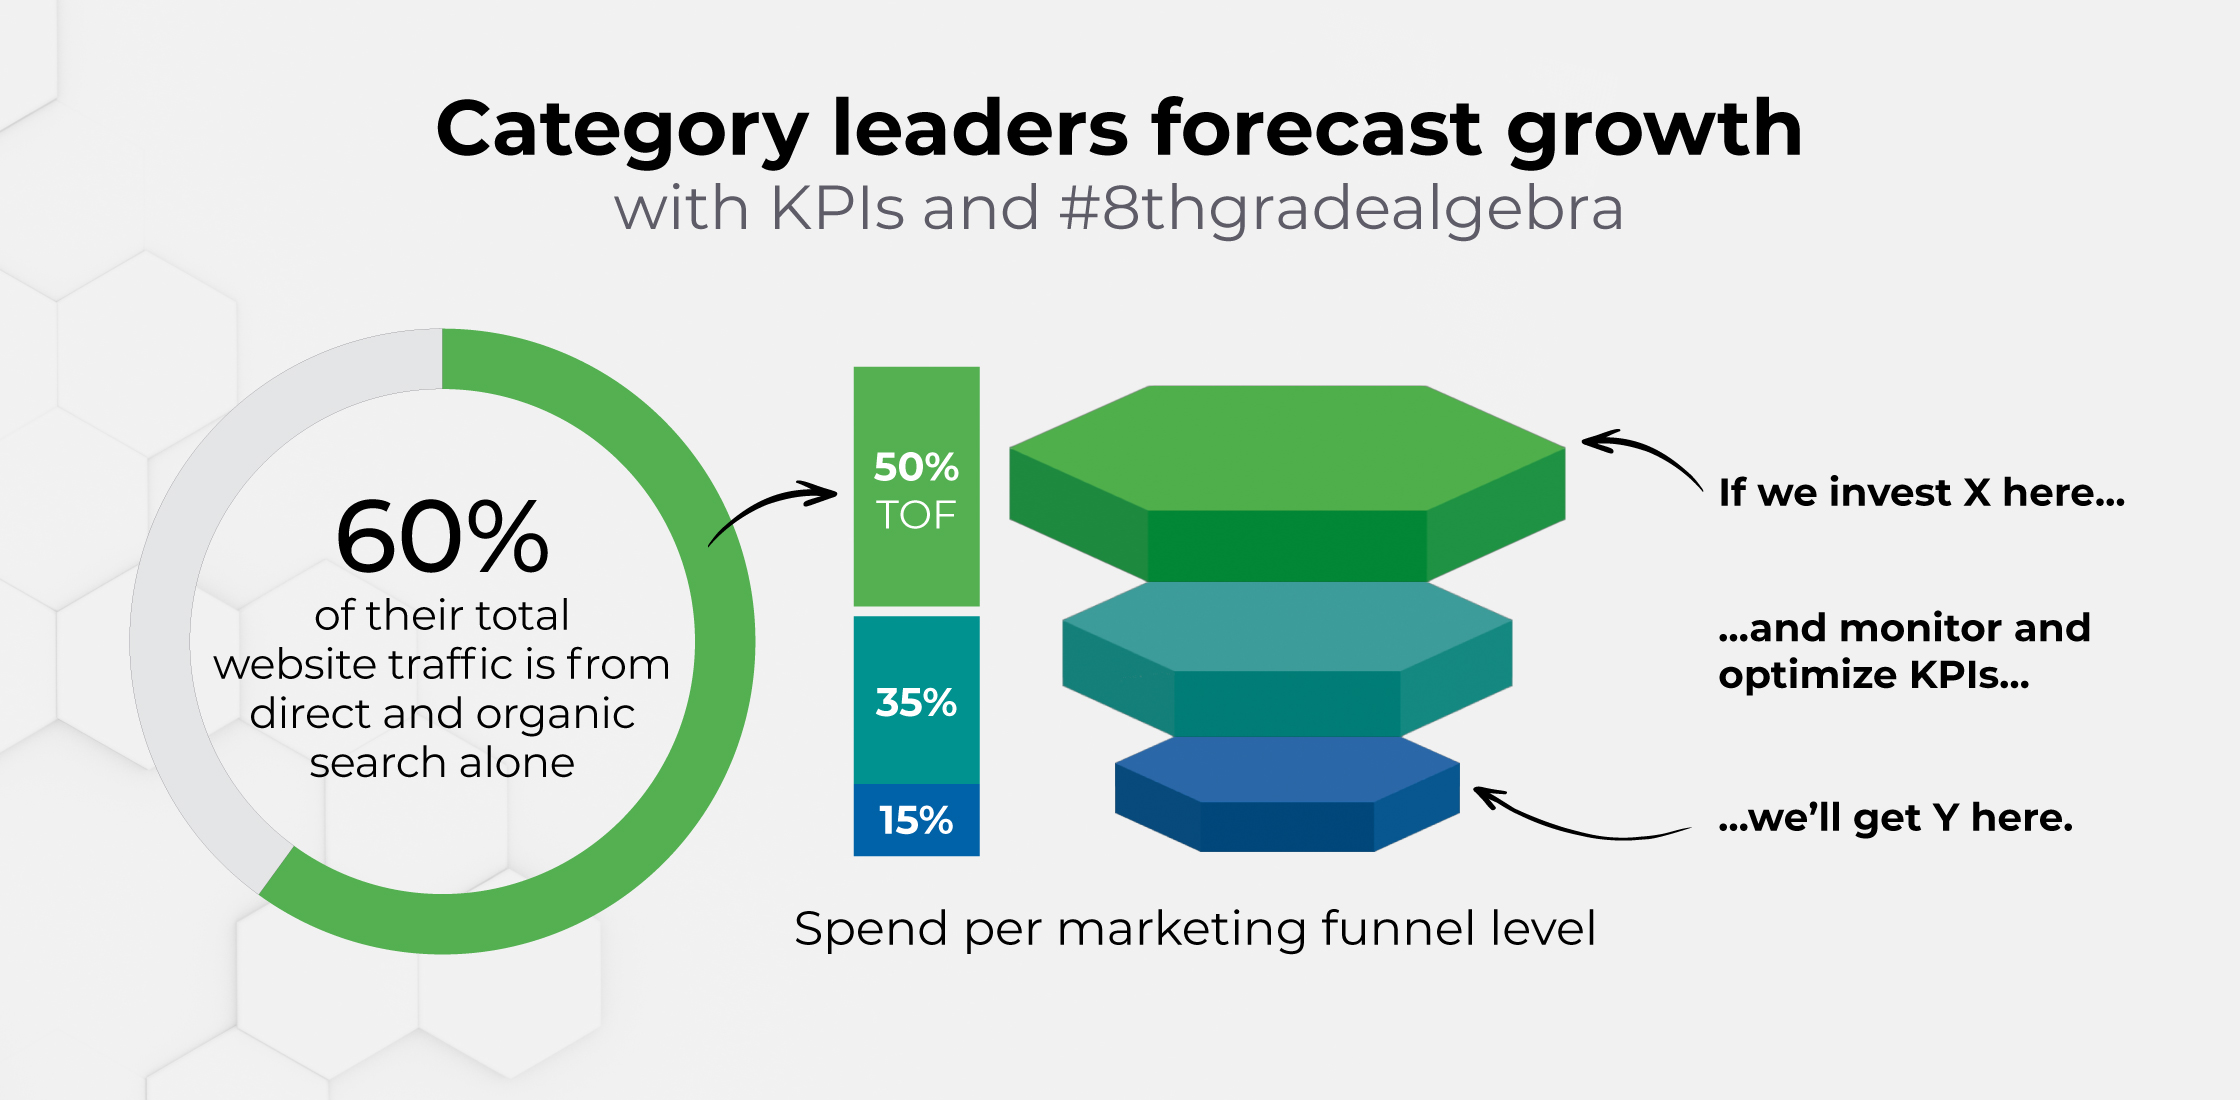 Category leaders forecast growth with KPIs and #8thgradealgebra